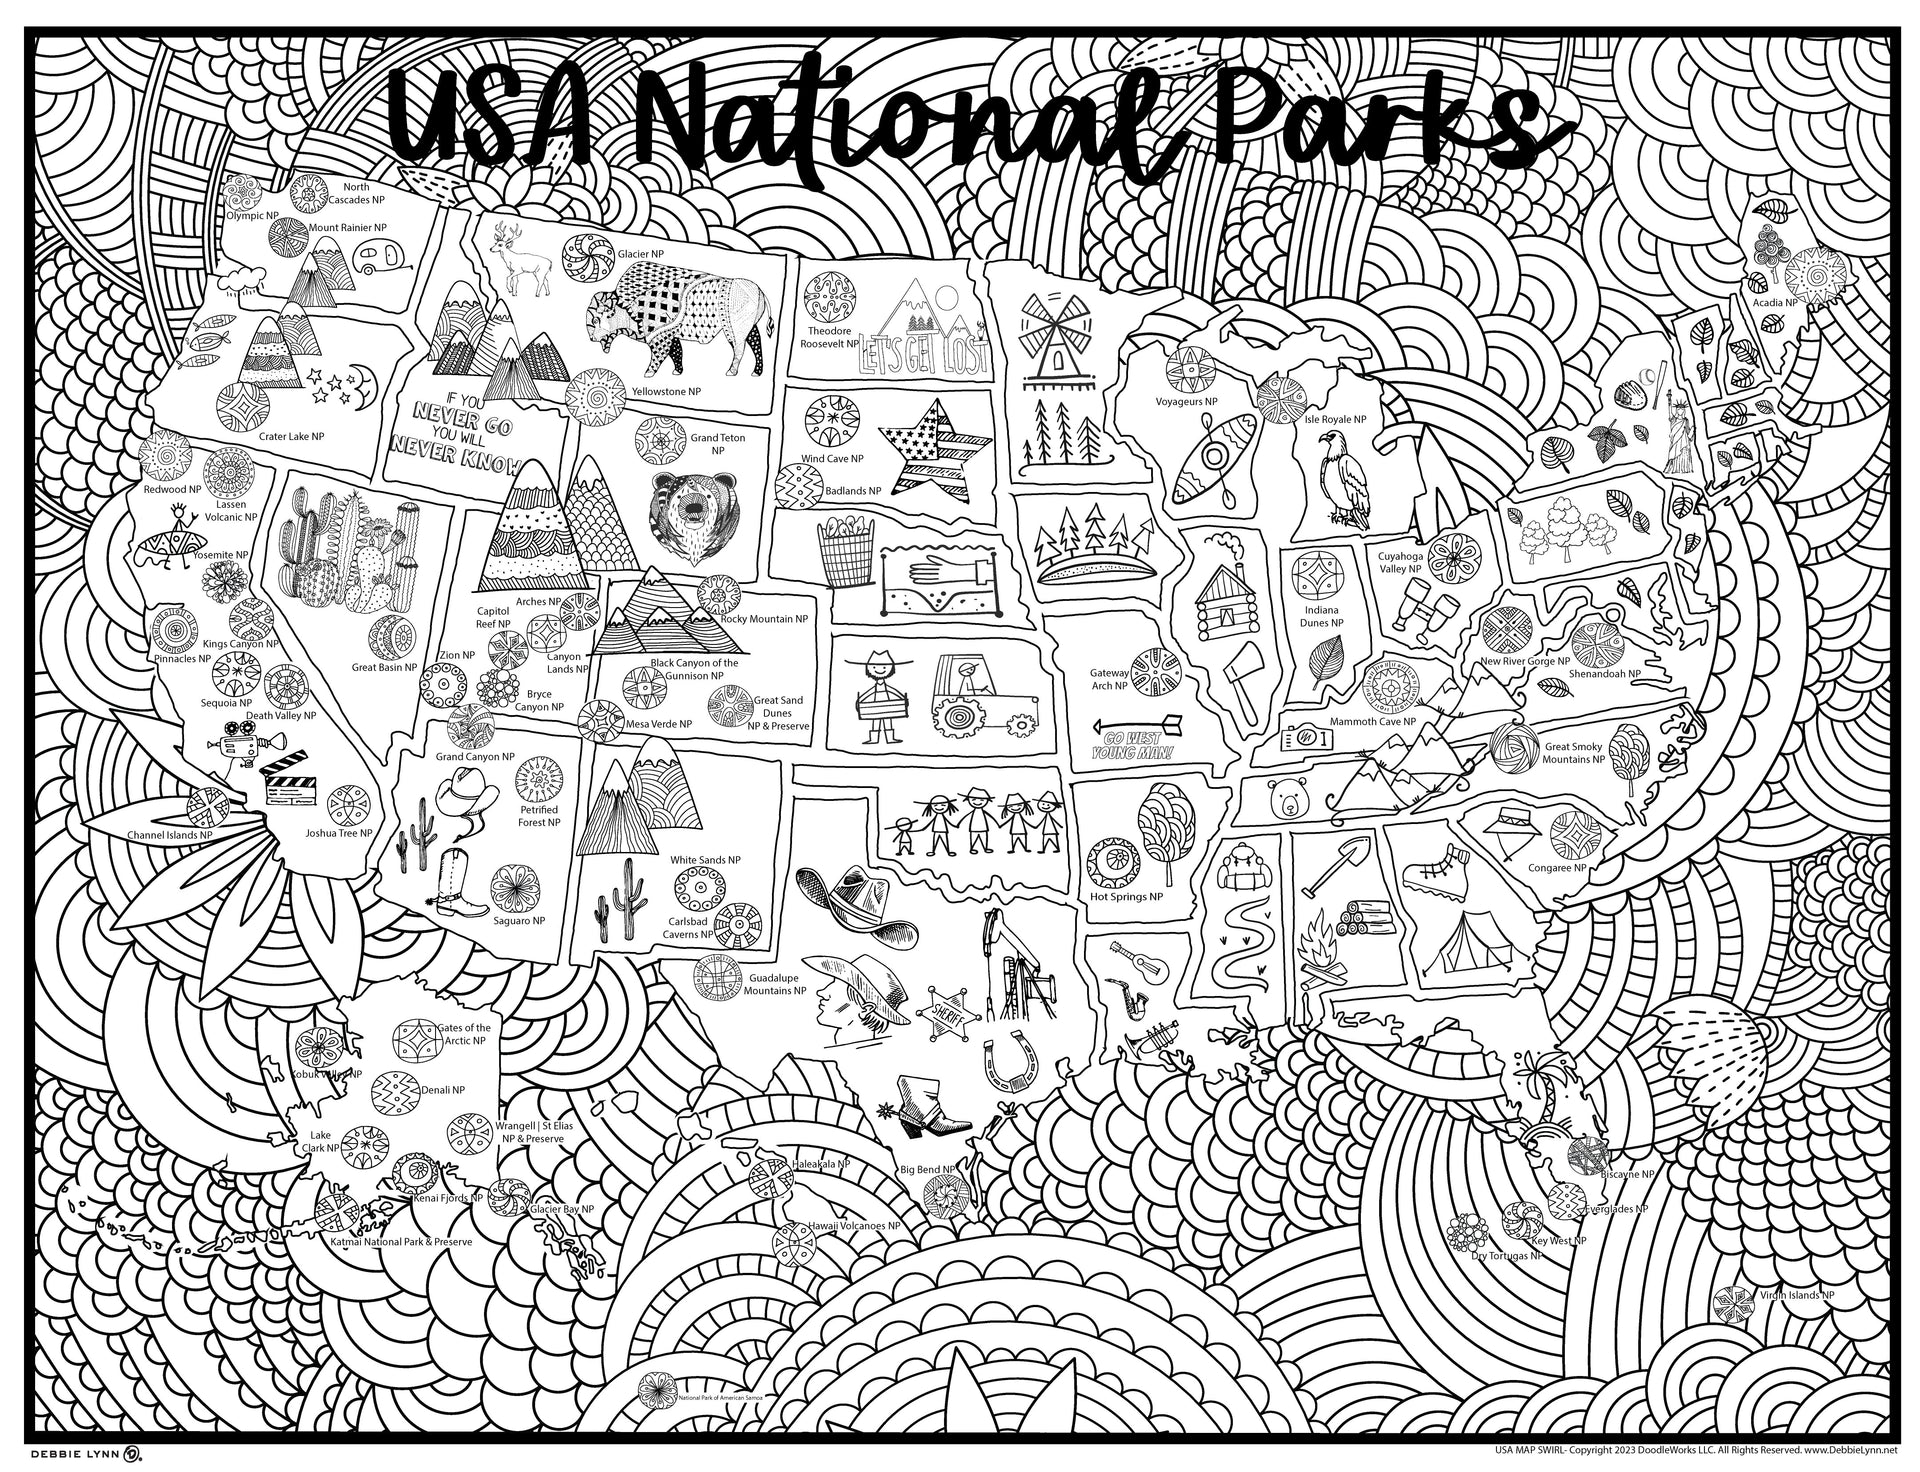 Pond in The Park - Giant 22 x 32.5 inch Line Art Coloring Poster